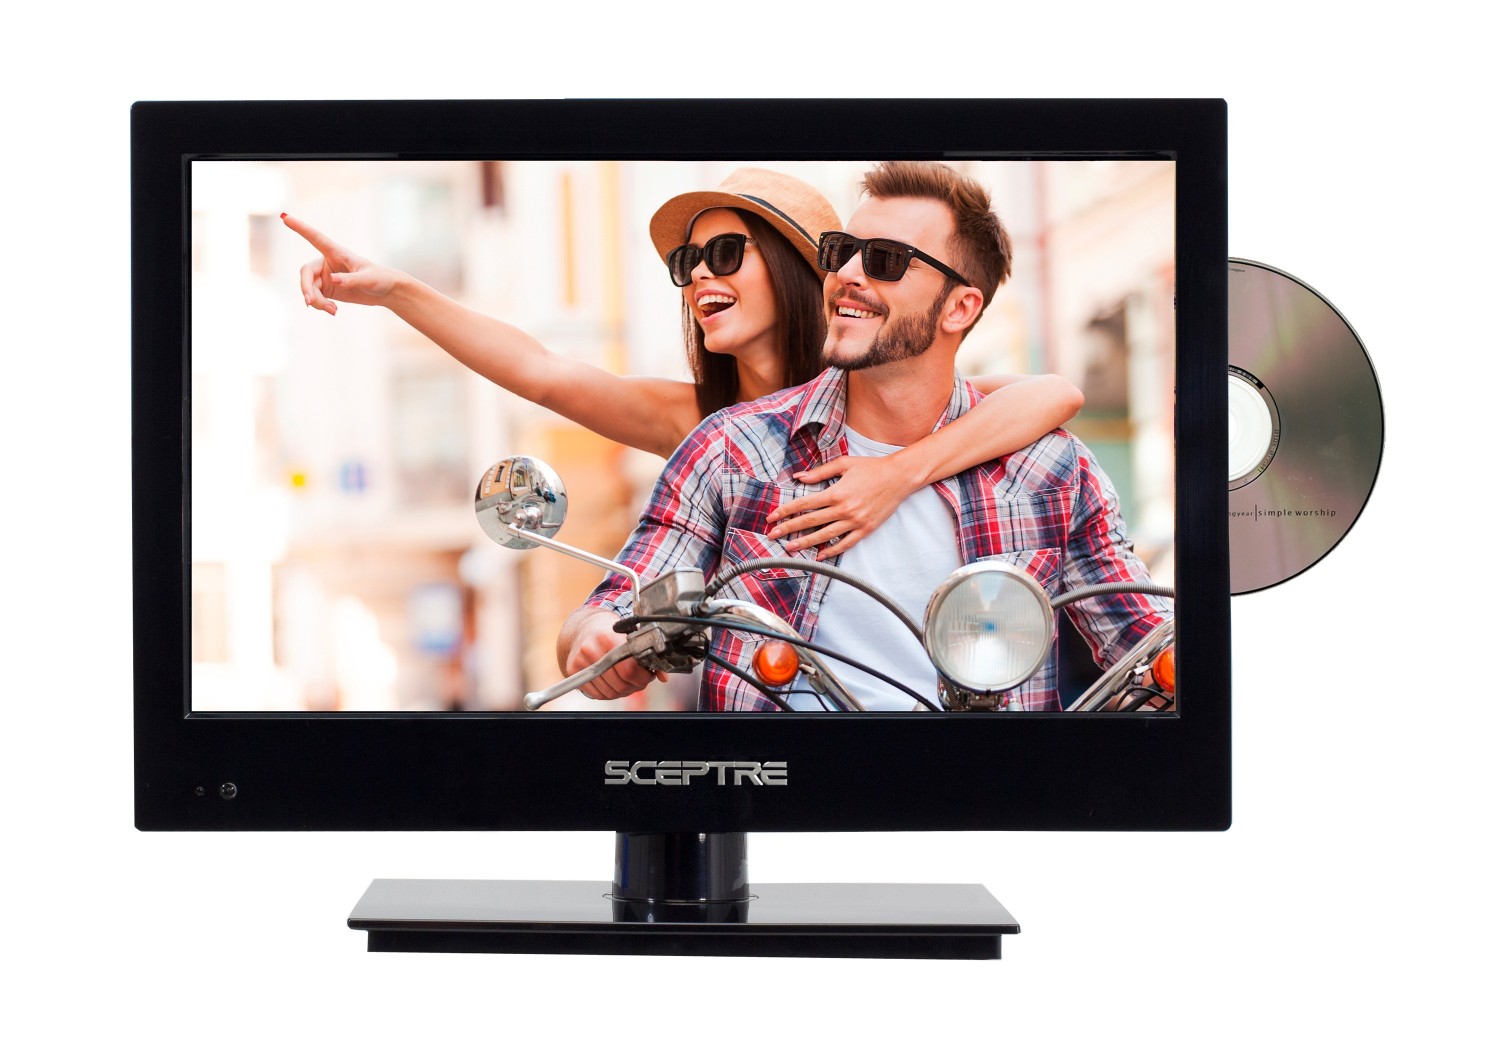 16 Full HD LED Digital TV with Built-in DVD Player